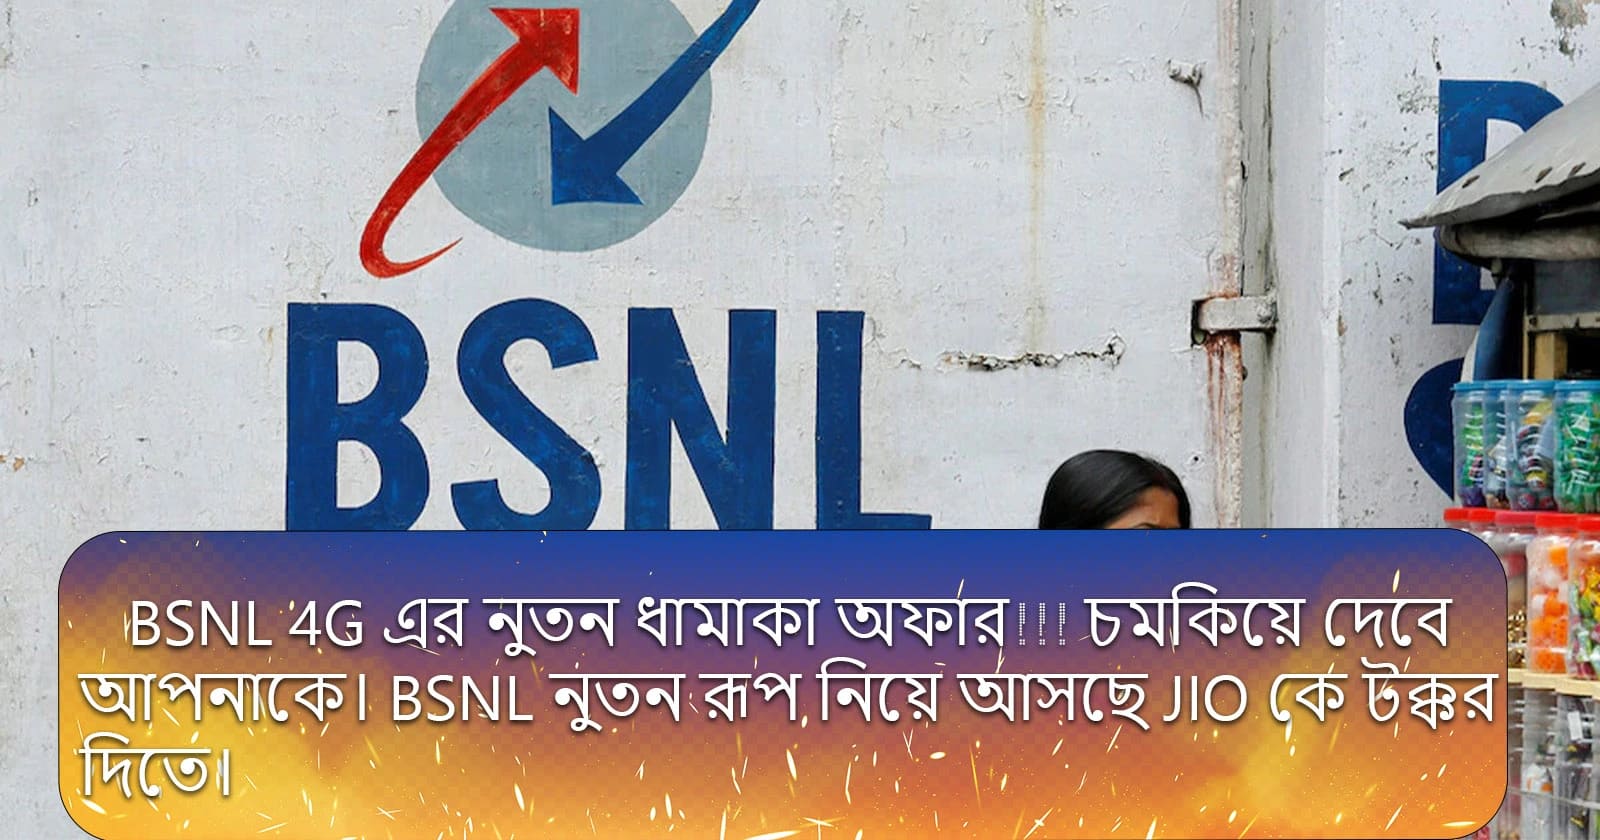 image is for bsnl